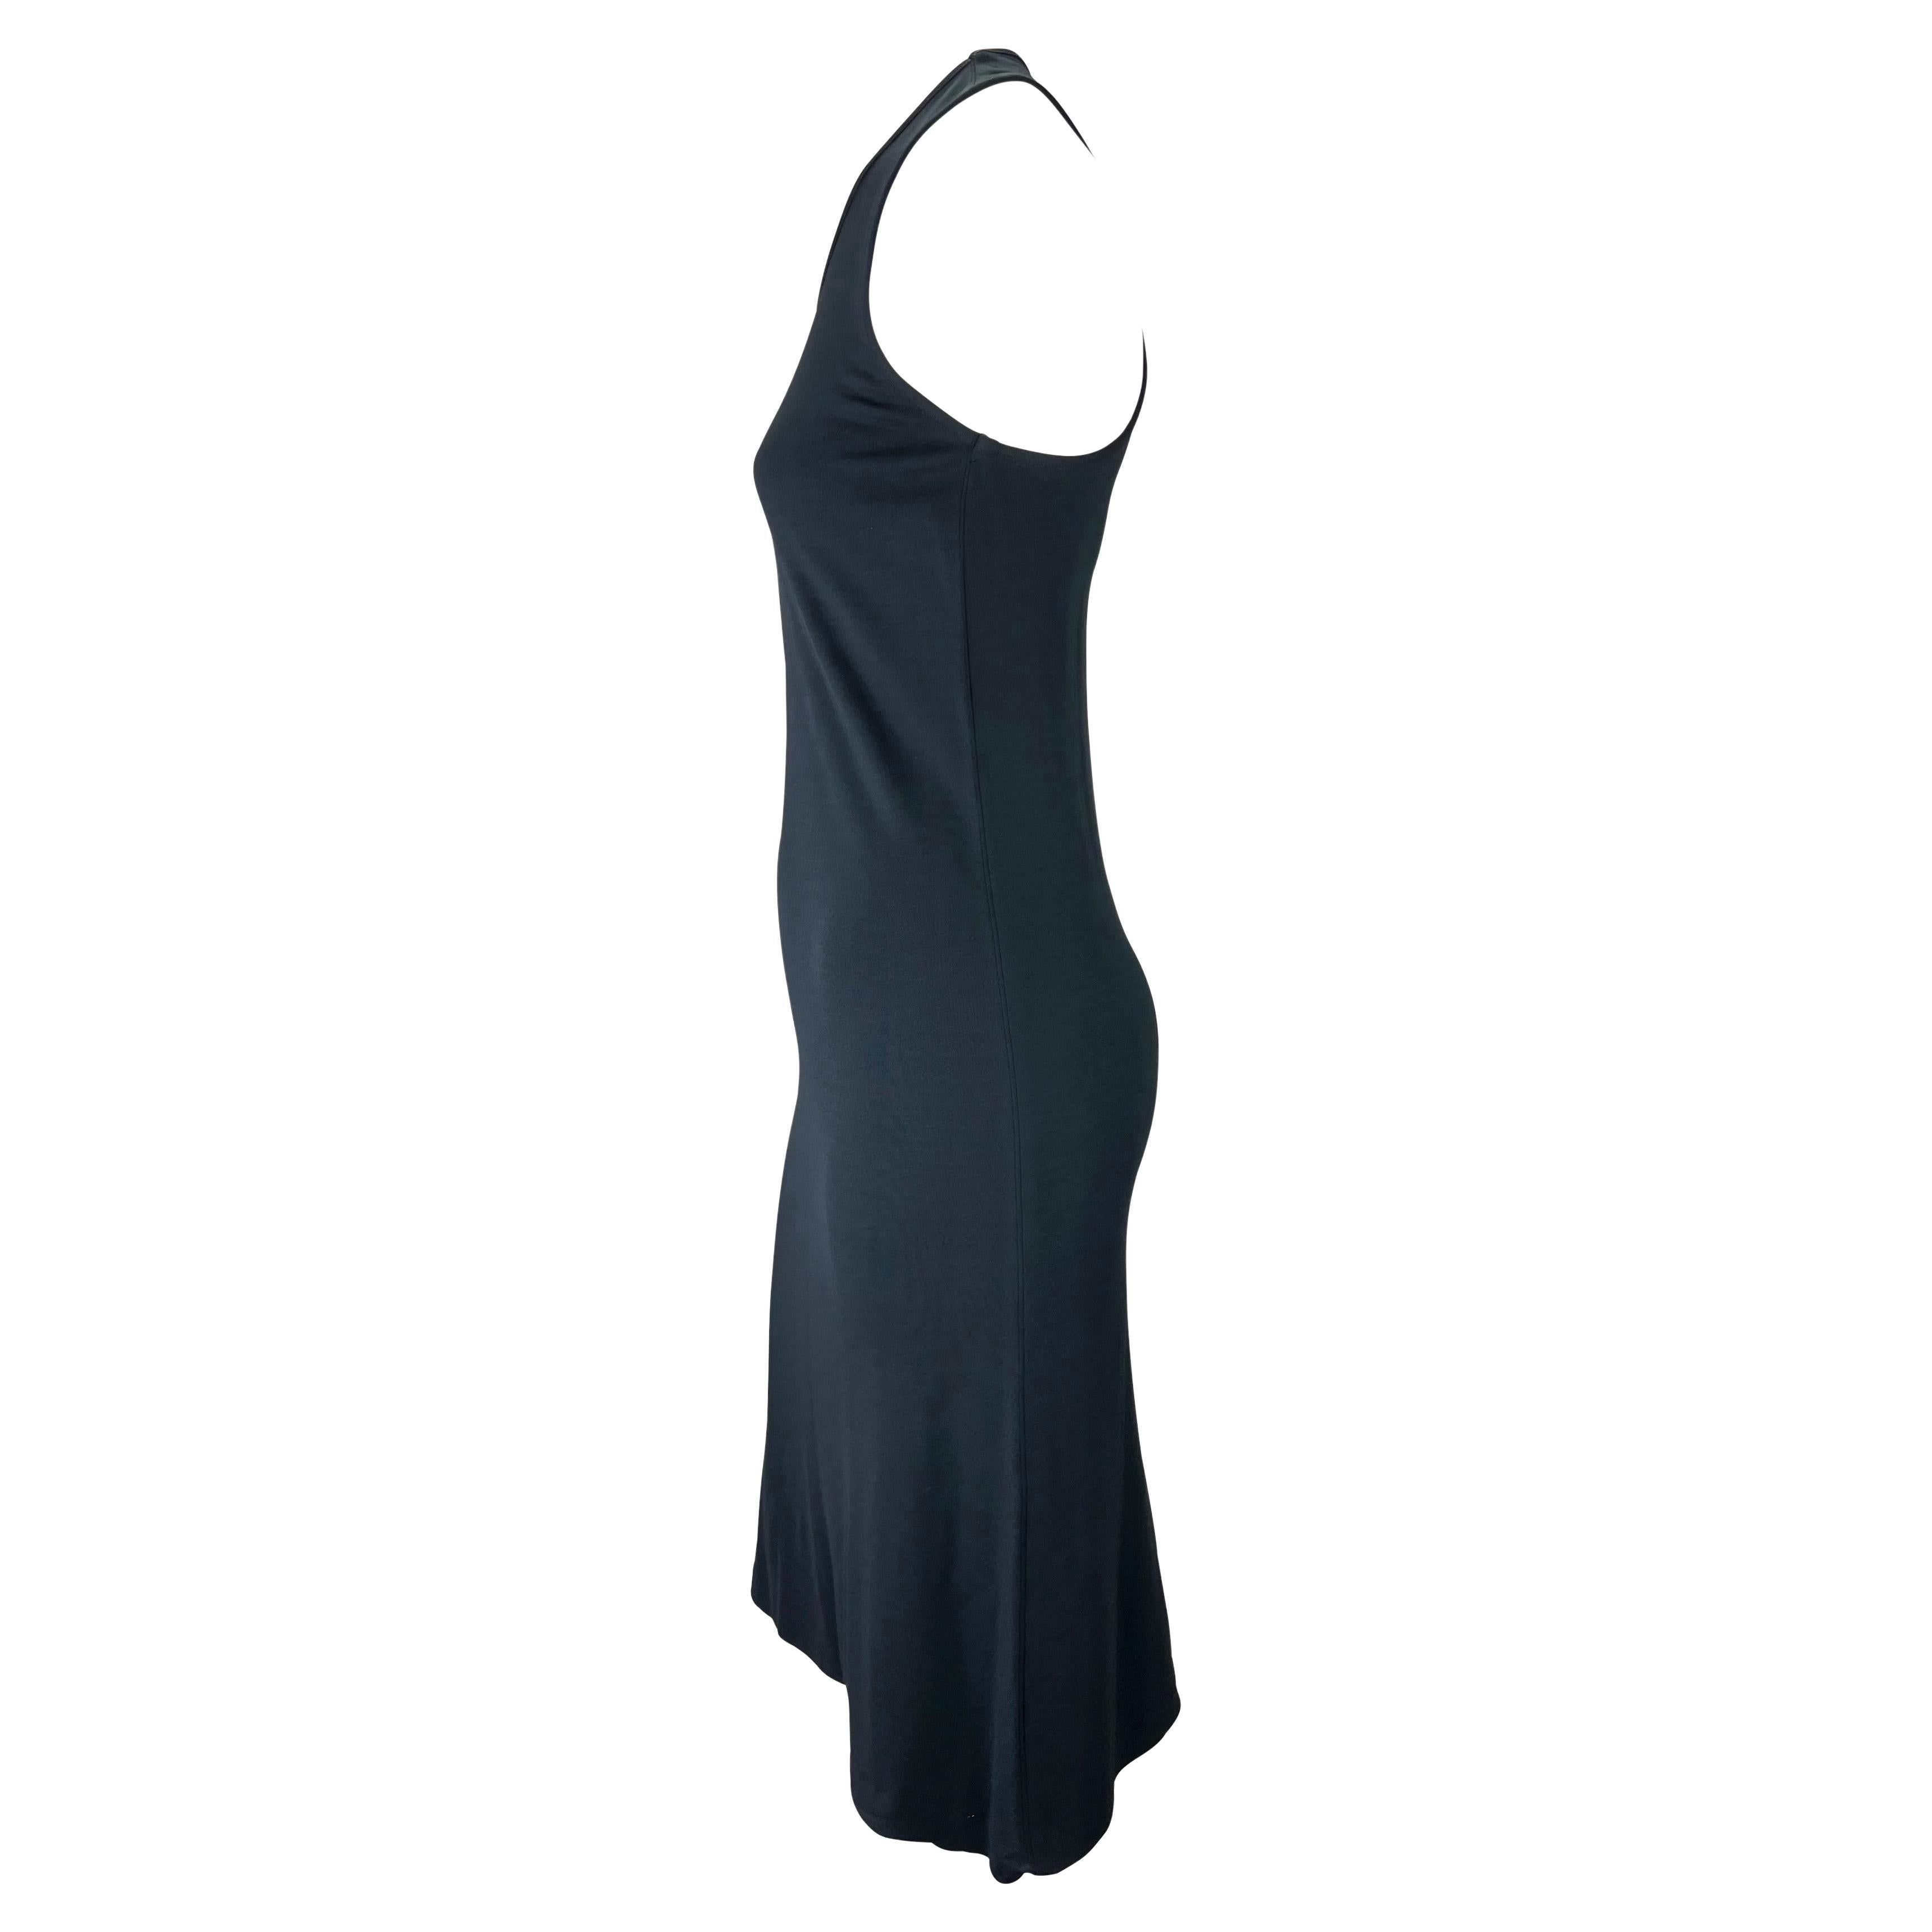 TheRealList presents: a rare sample navy racerback Gucci dress, designed by Tom Ford. A rare sample piece from the Spring/Summer 1998 collection, this  formfitting viscose dress features a scoop neckline and racerback. Simple and effortlessly chic,